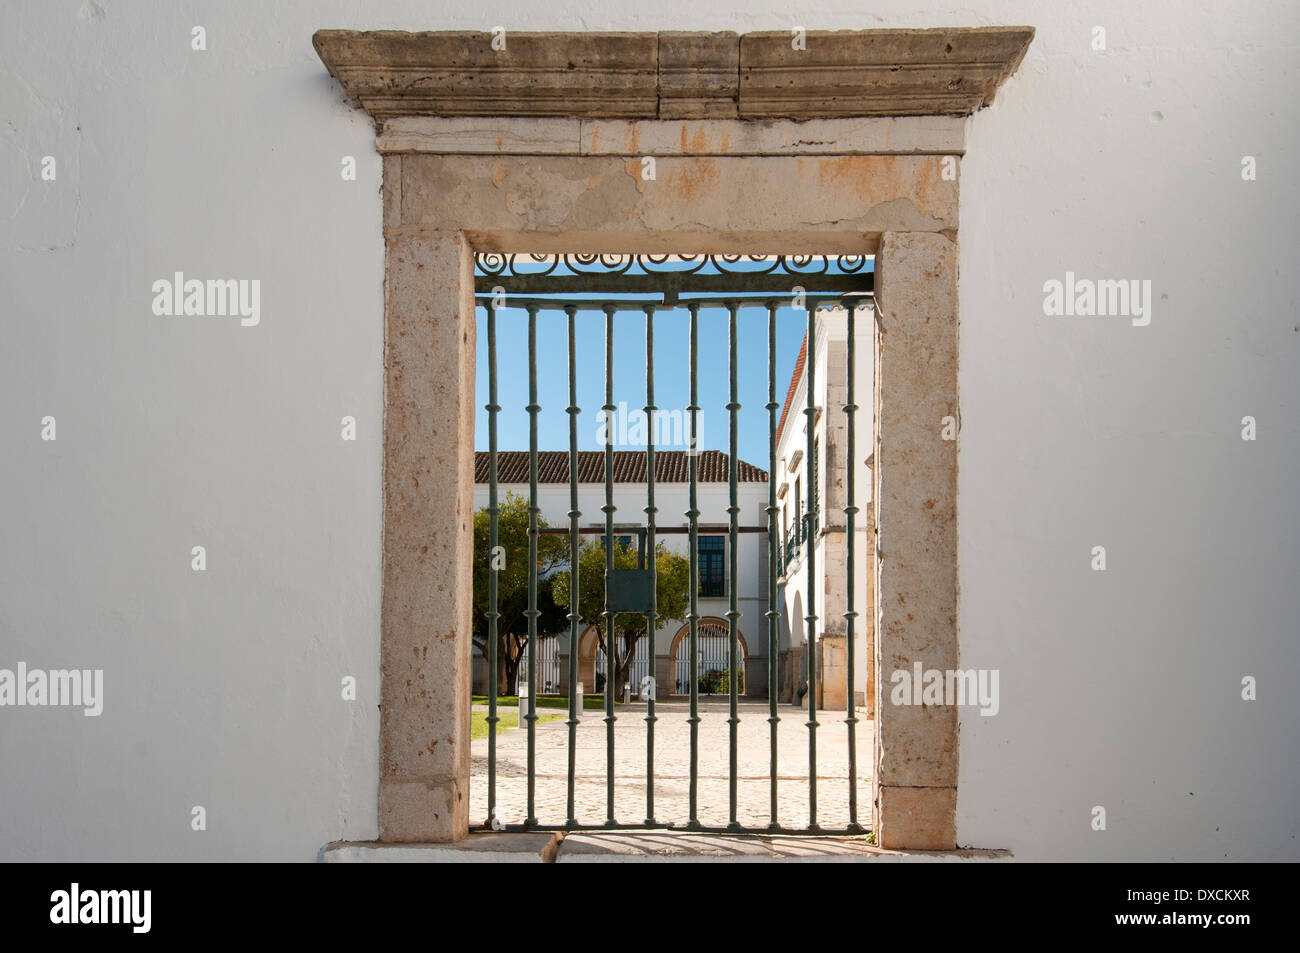 wrought iron gate in the old town of faro Stock Photo